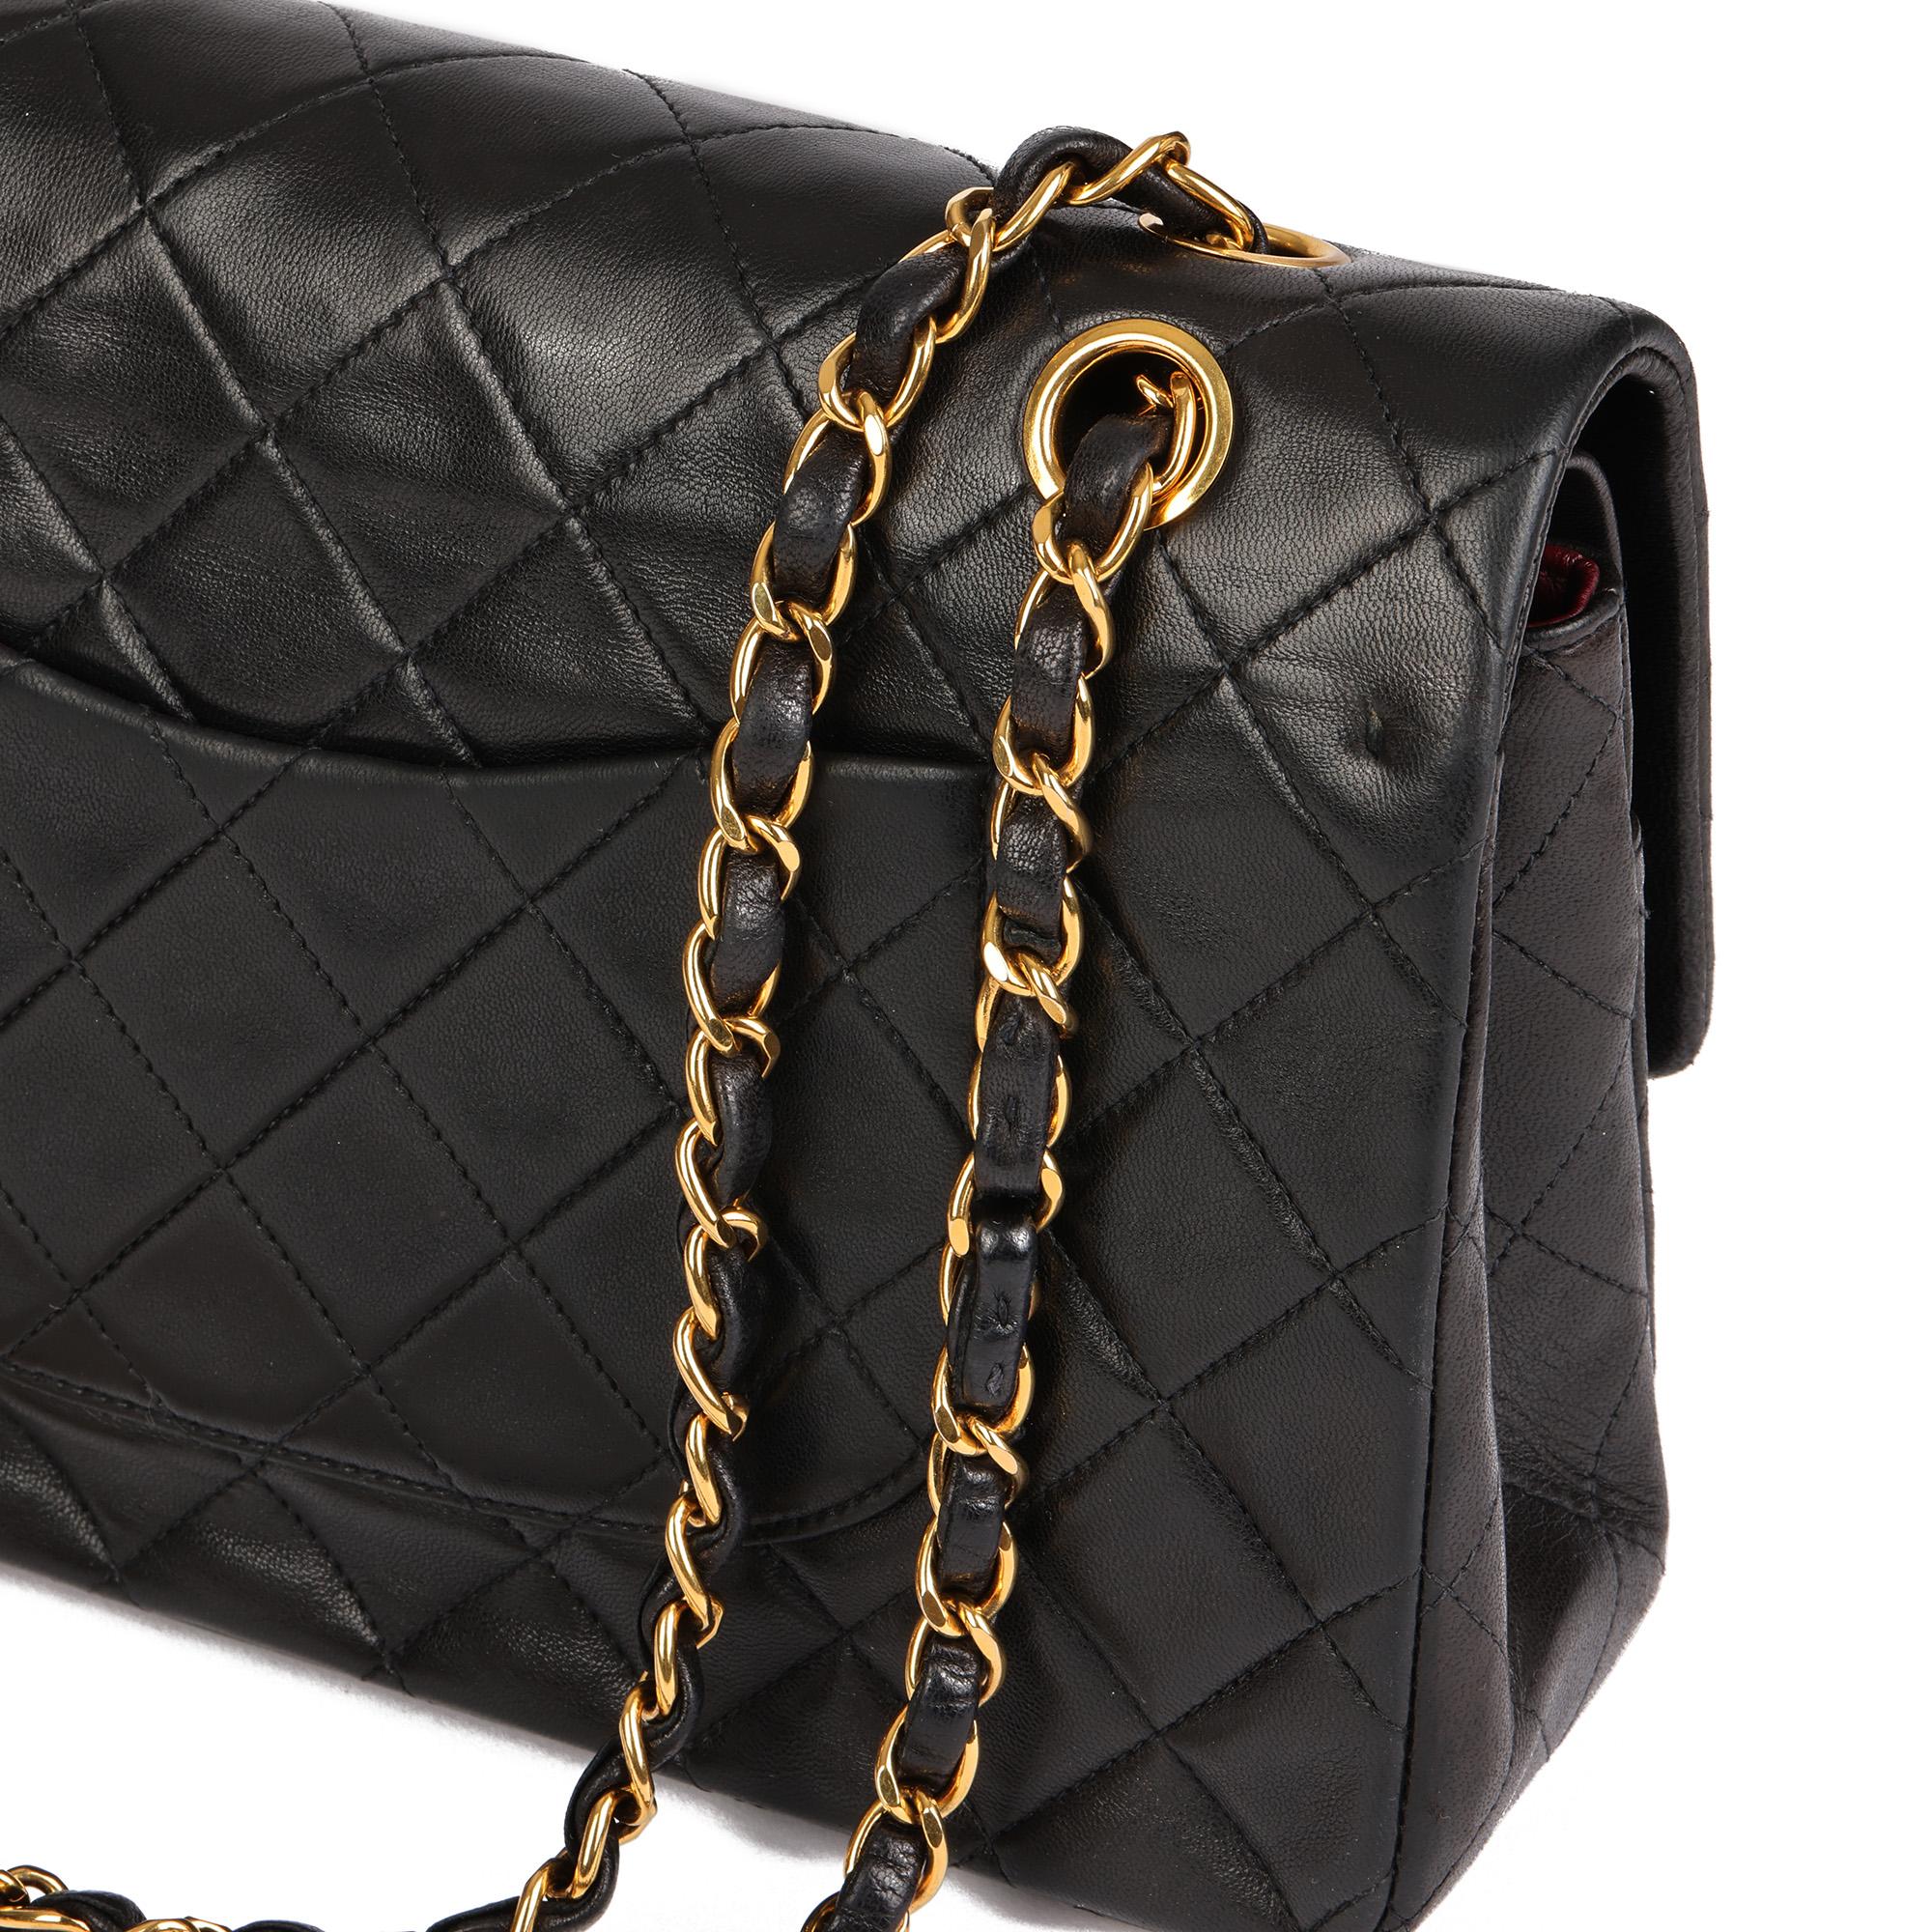 Chanel BLACK QUILTED LAMBSKIN VINTAGE MEDIUM CLASSIC DOUBLE FLAP BAG 3